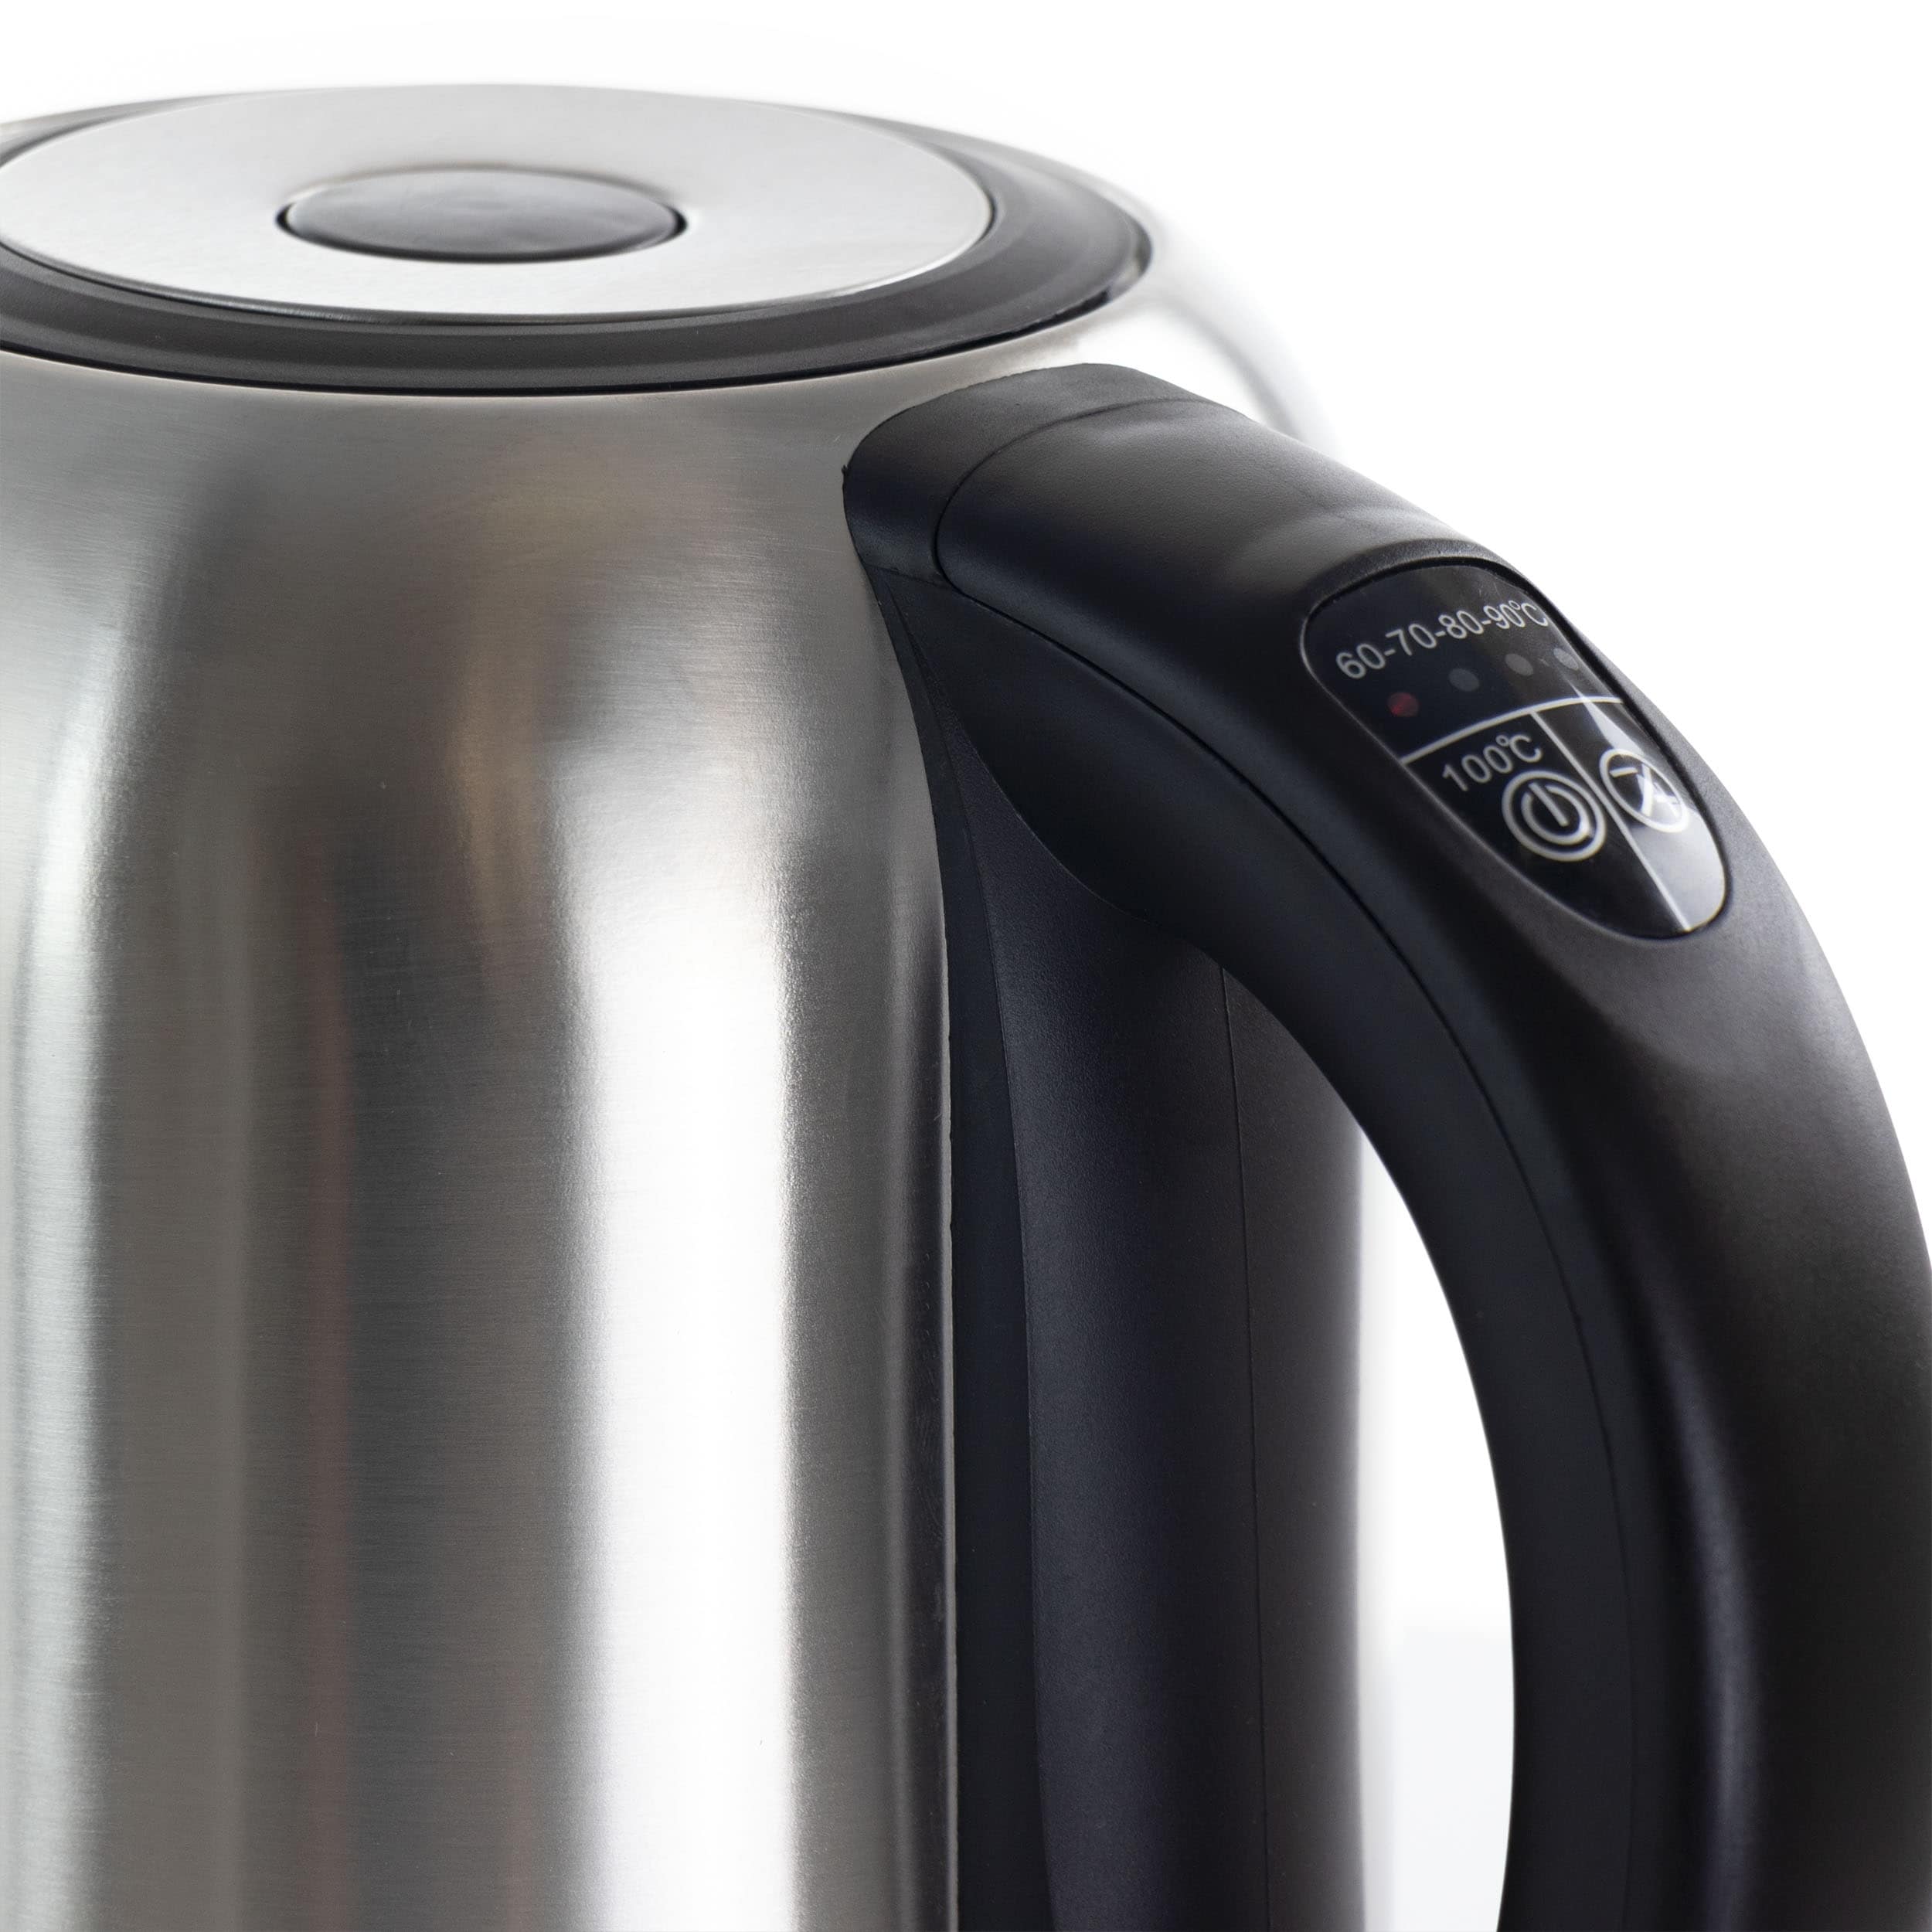 MegaChef 1.7Lt. Stainless Steel Kettle with Electric Base - On Sale - Bed  Bath & Beyond - 32426946